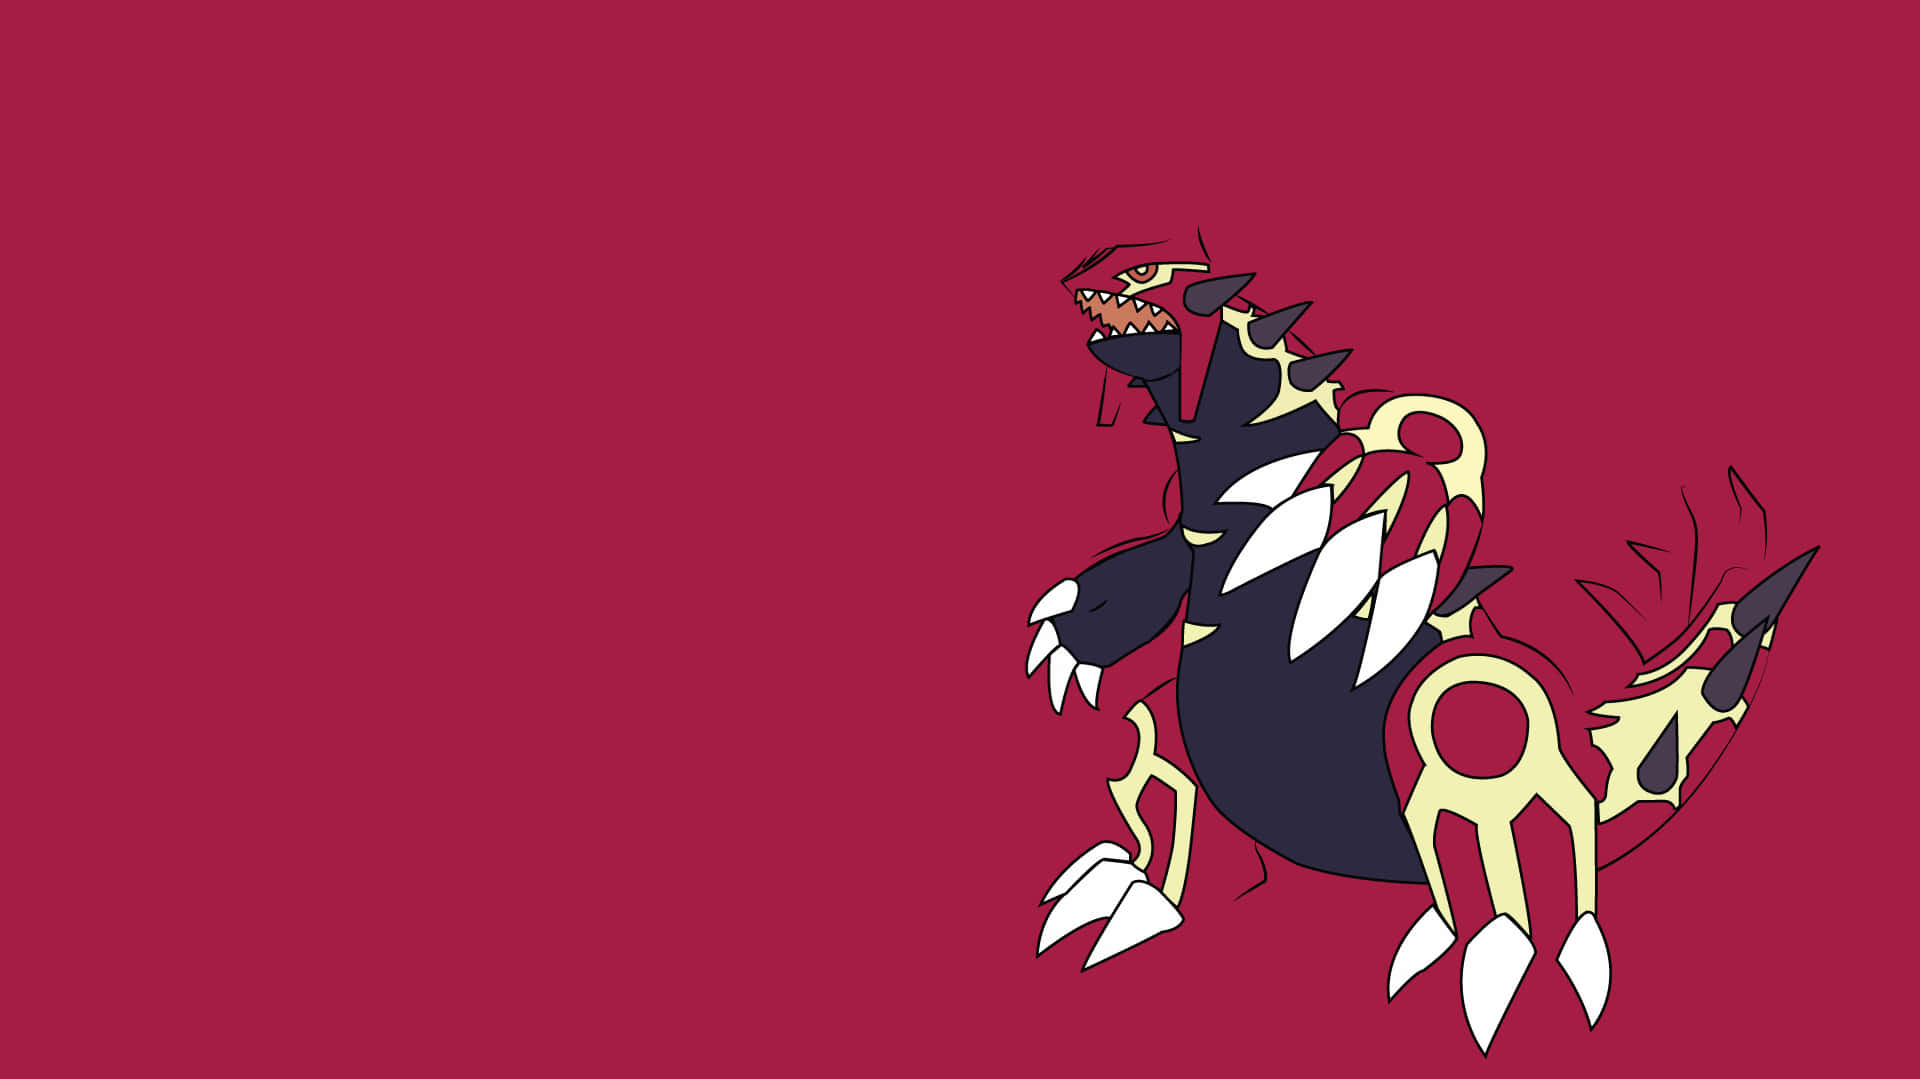 Primalgroudon In Burgundy Can Be Translated To Italian As 